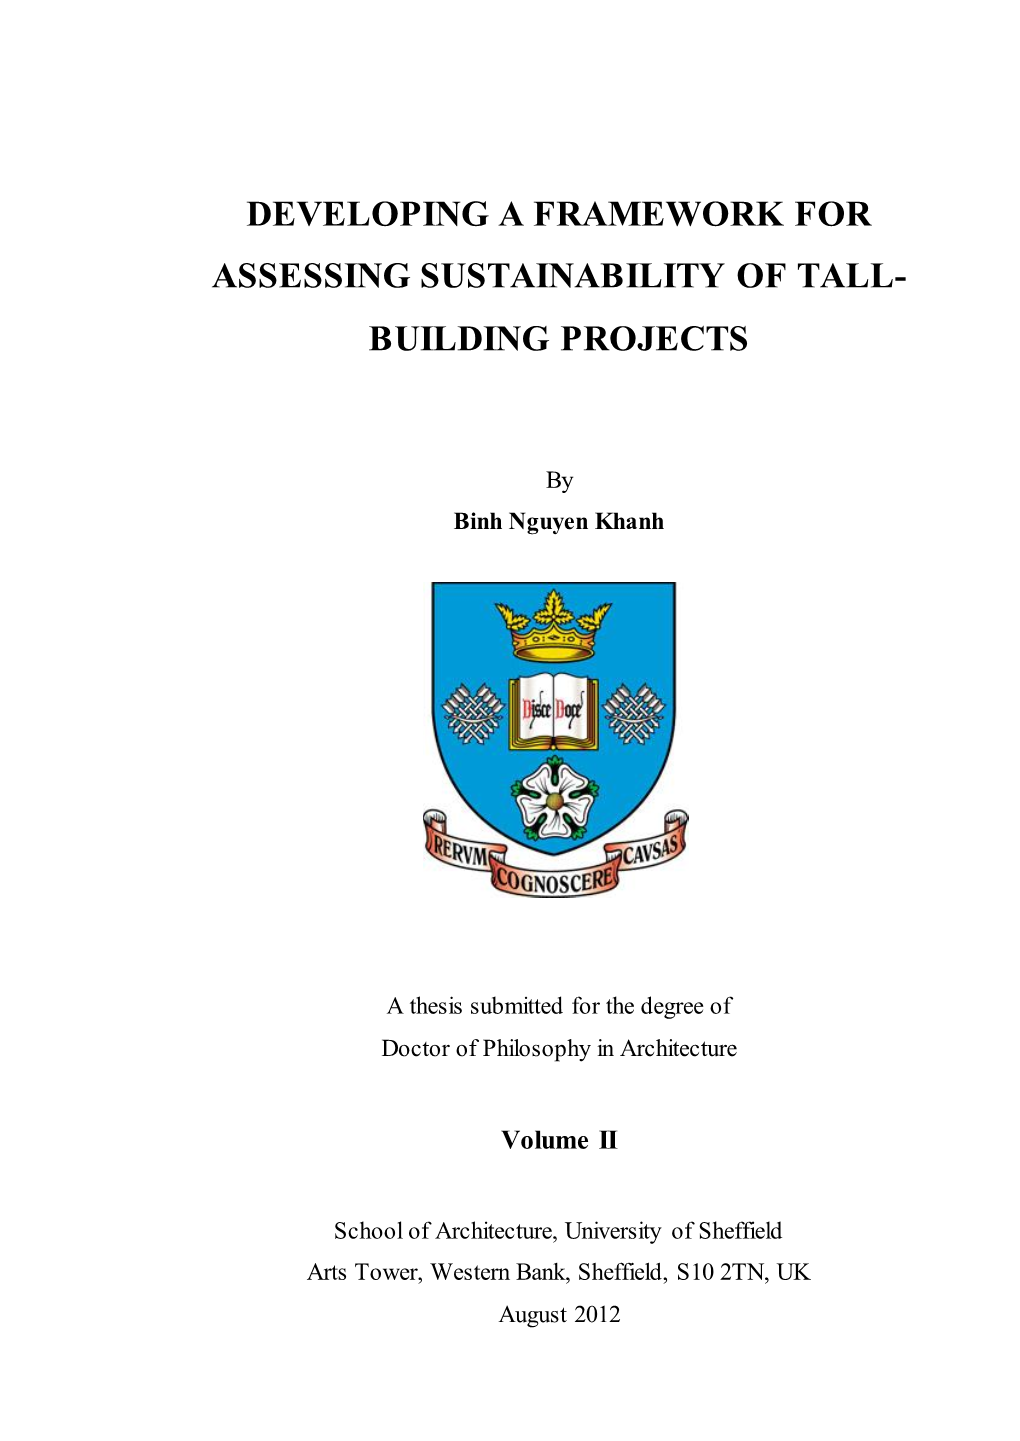 Developing a Framework for Assessing Sustainability of Tall